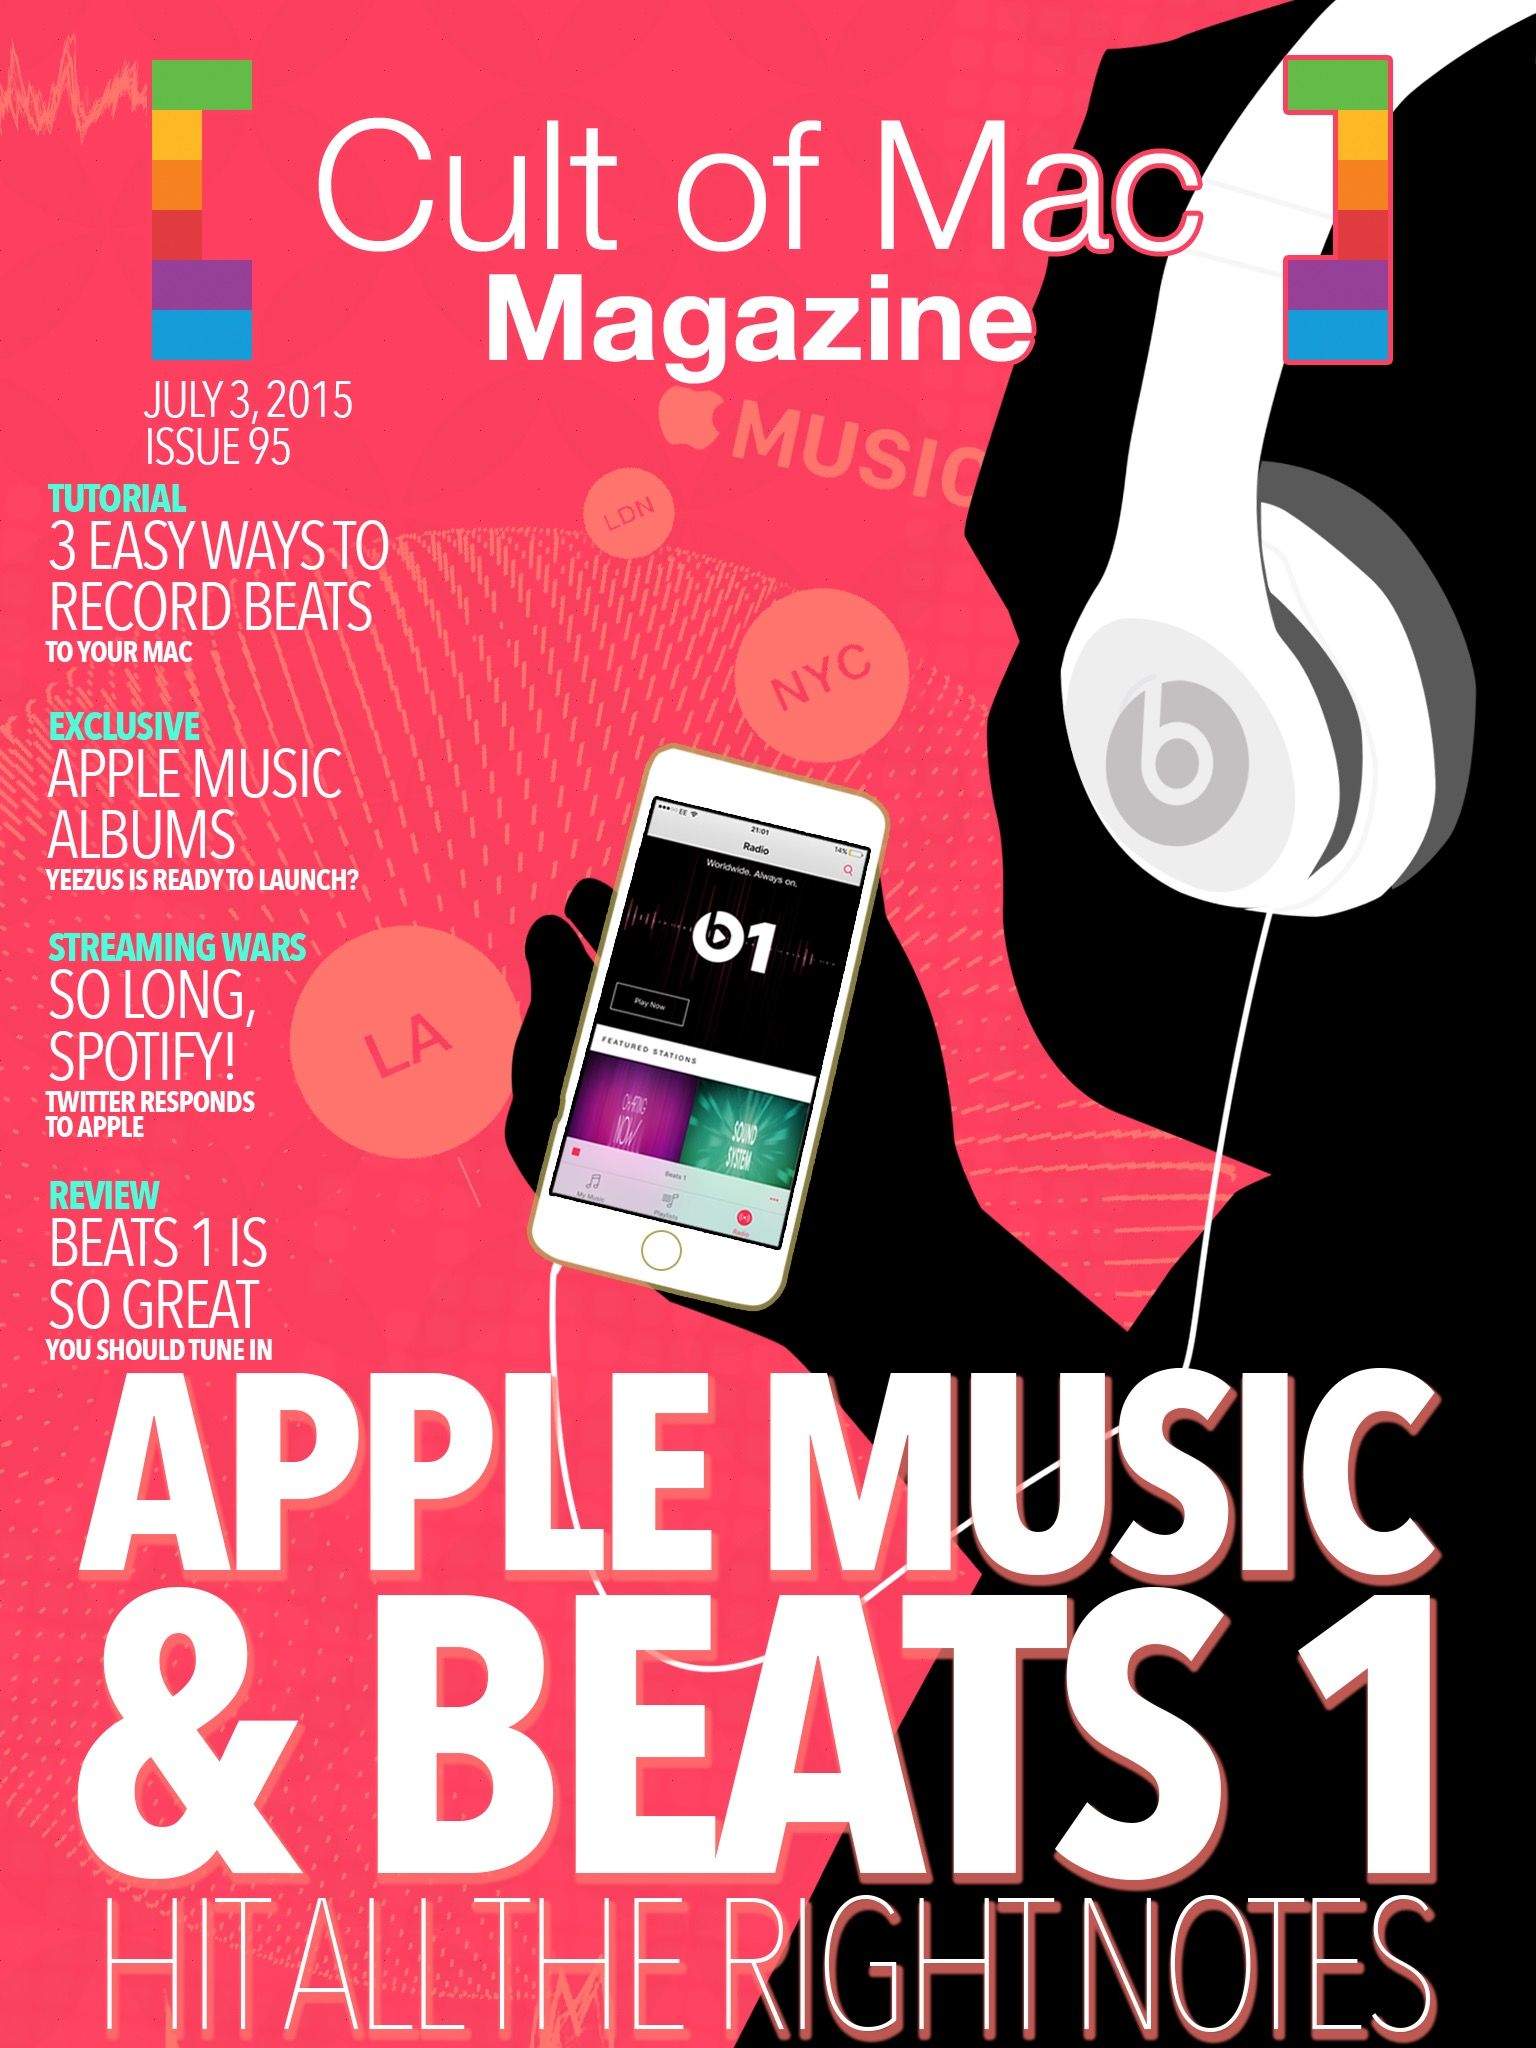 All the news you can use about Apple Music and Beats 1.